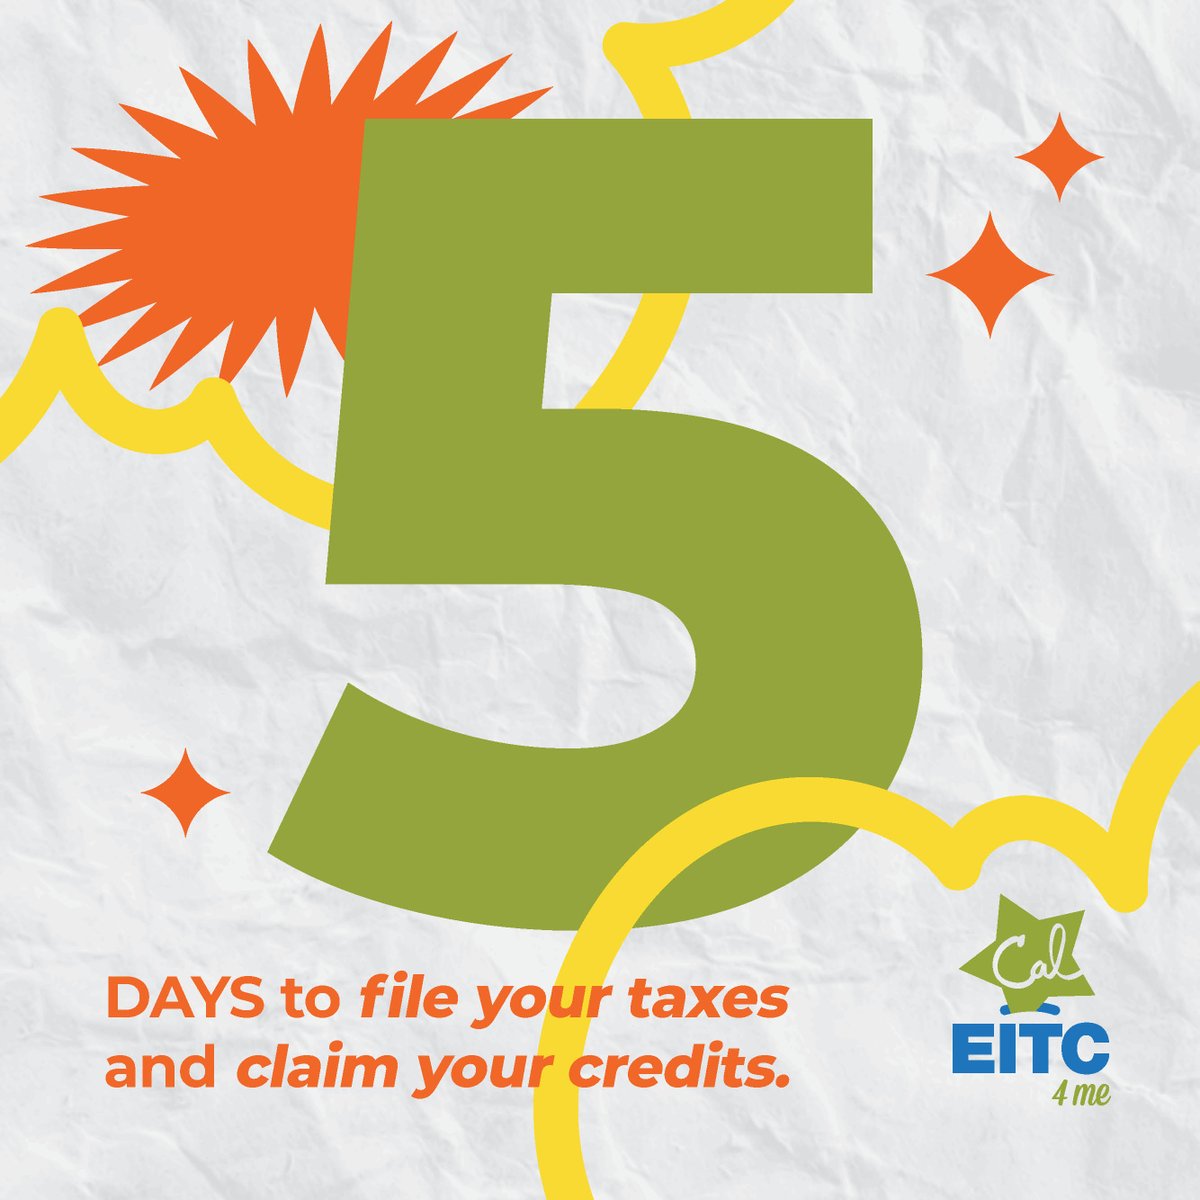 There's still time to file your taxes and claim your credits! Visit caleitc.org for information on tax credits, a calculator to estimate what you might be able to claim and more!